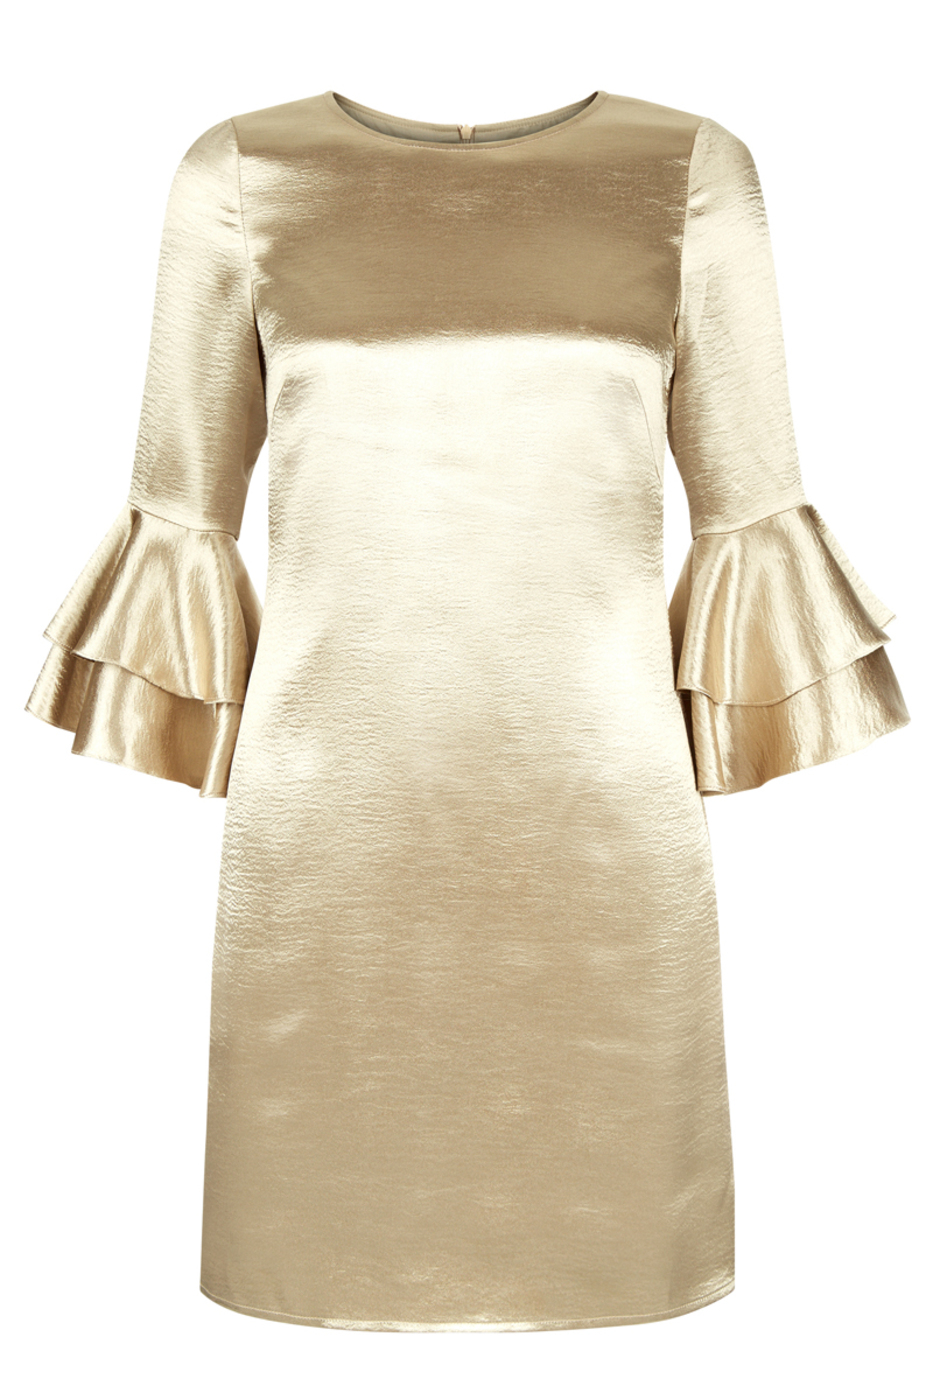 TRAFFIC PEOPLE Retro Mod 60s Satin Mollie Dress in Champagne